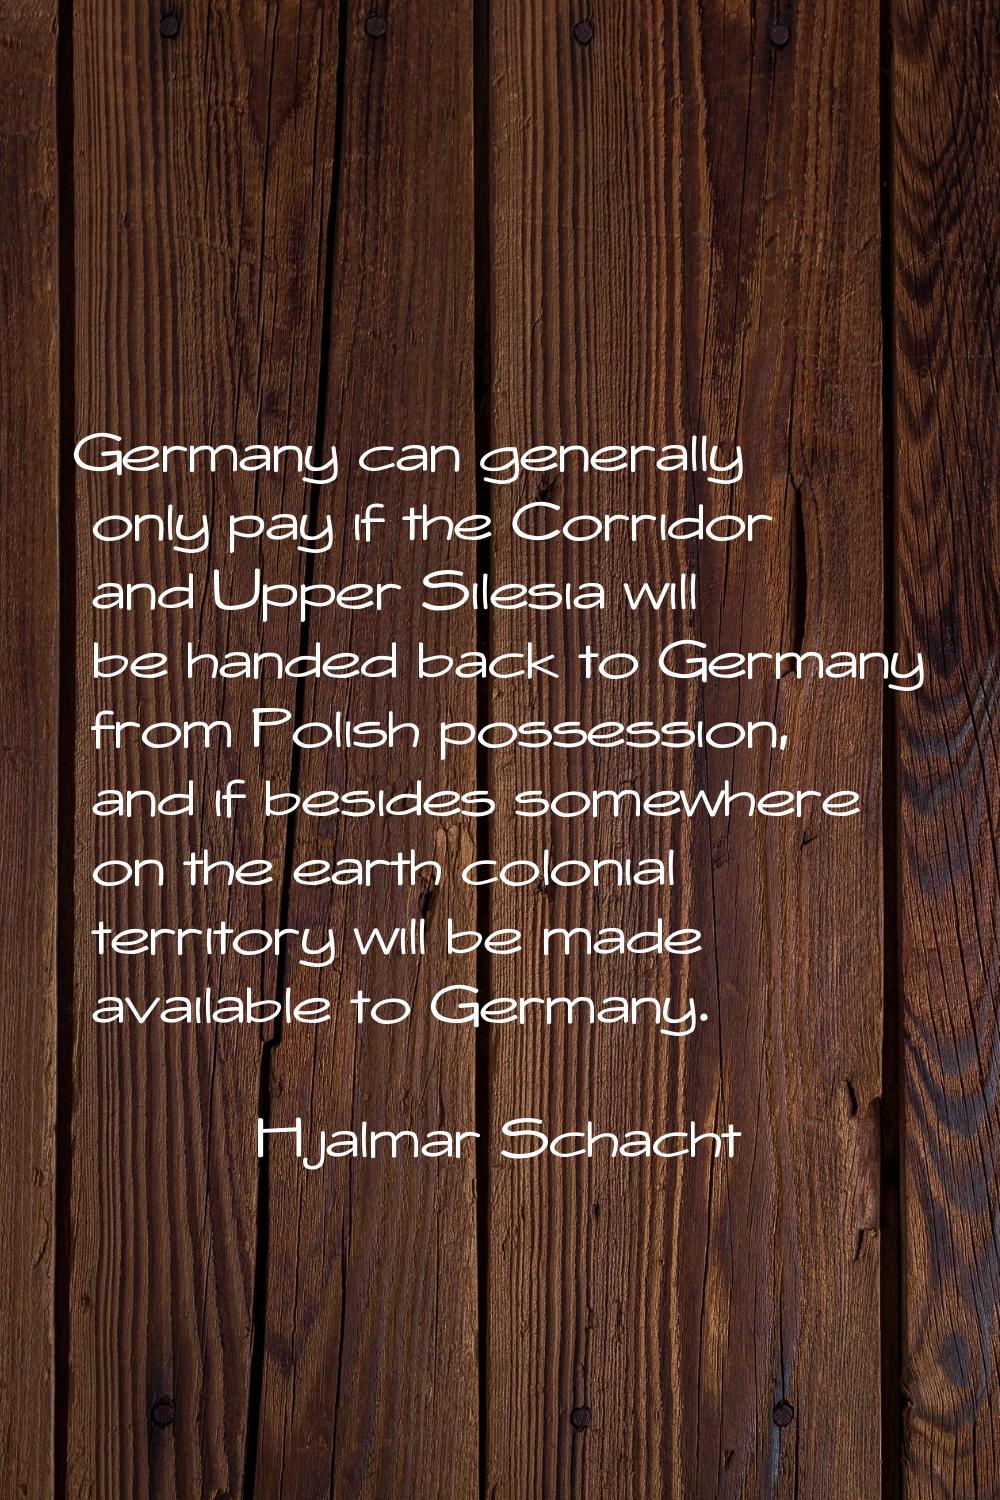 Germany can generally only pay if the Corridor and Upper Silesia will be handed back to Germany fro